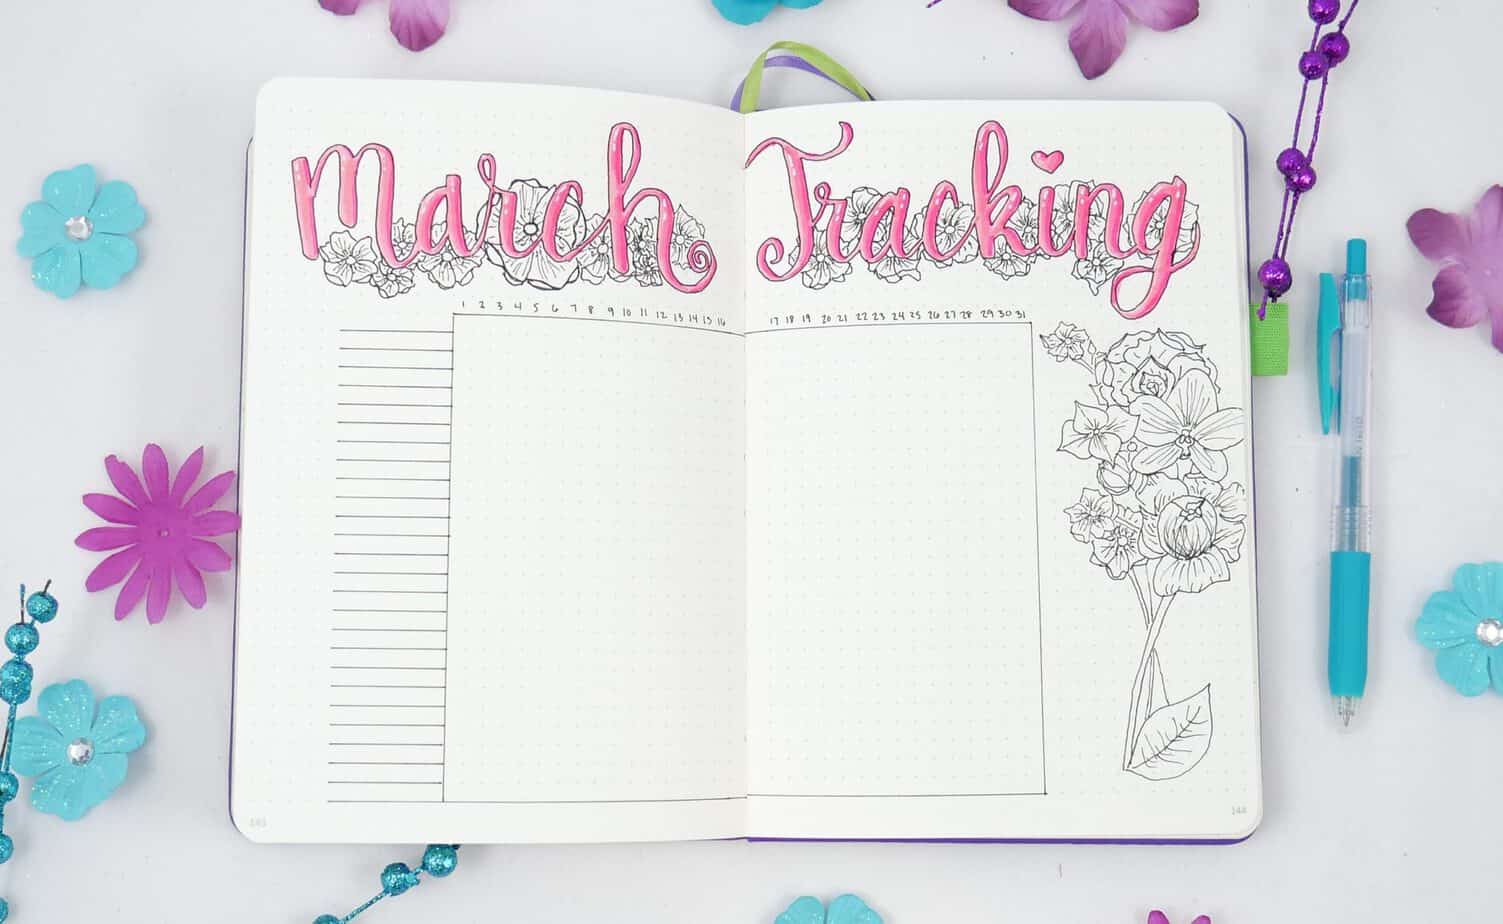 How To: Bullet Journal Floral Theme - Video Tutorial